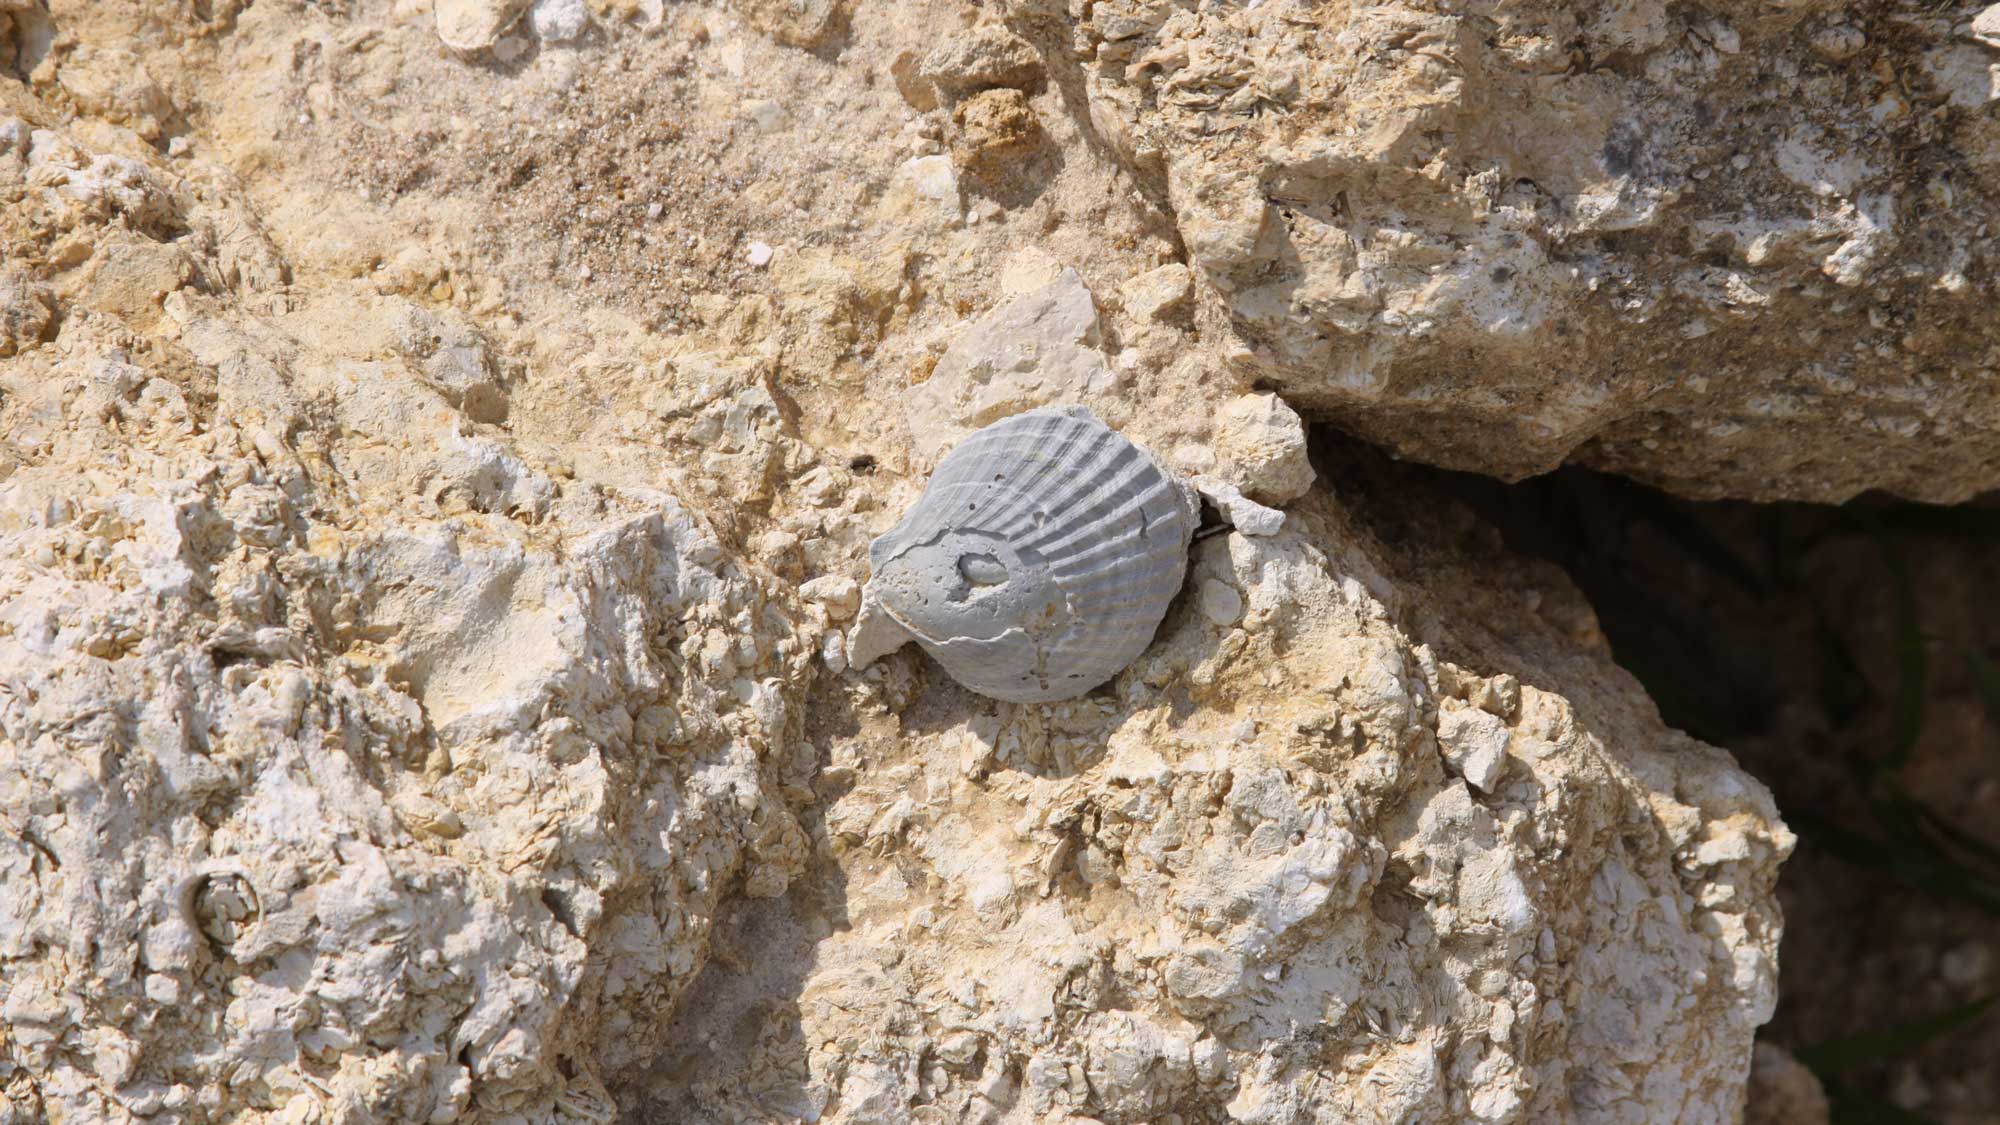 Photograph of a fossil scallop shell in the Eocene Ocala Limestone of Florida.